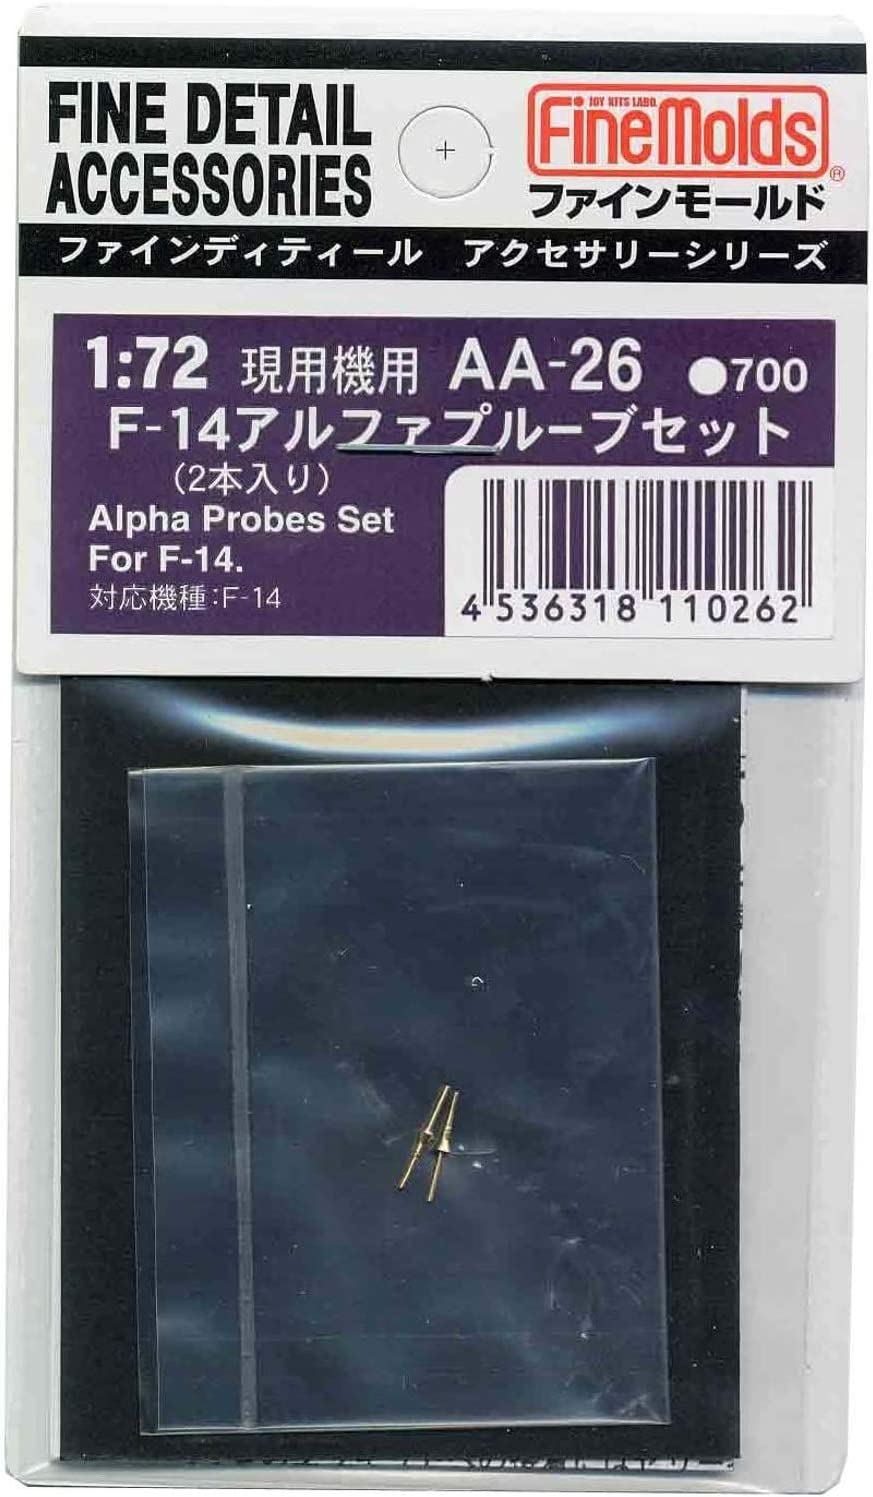 AA26 Alpha probes set for F-14 series